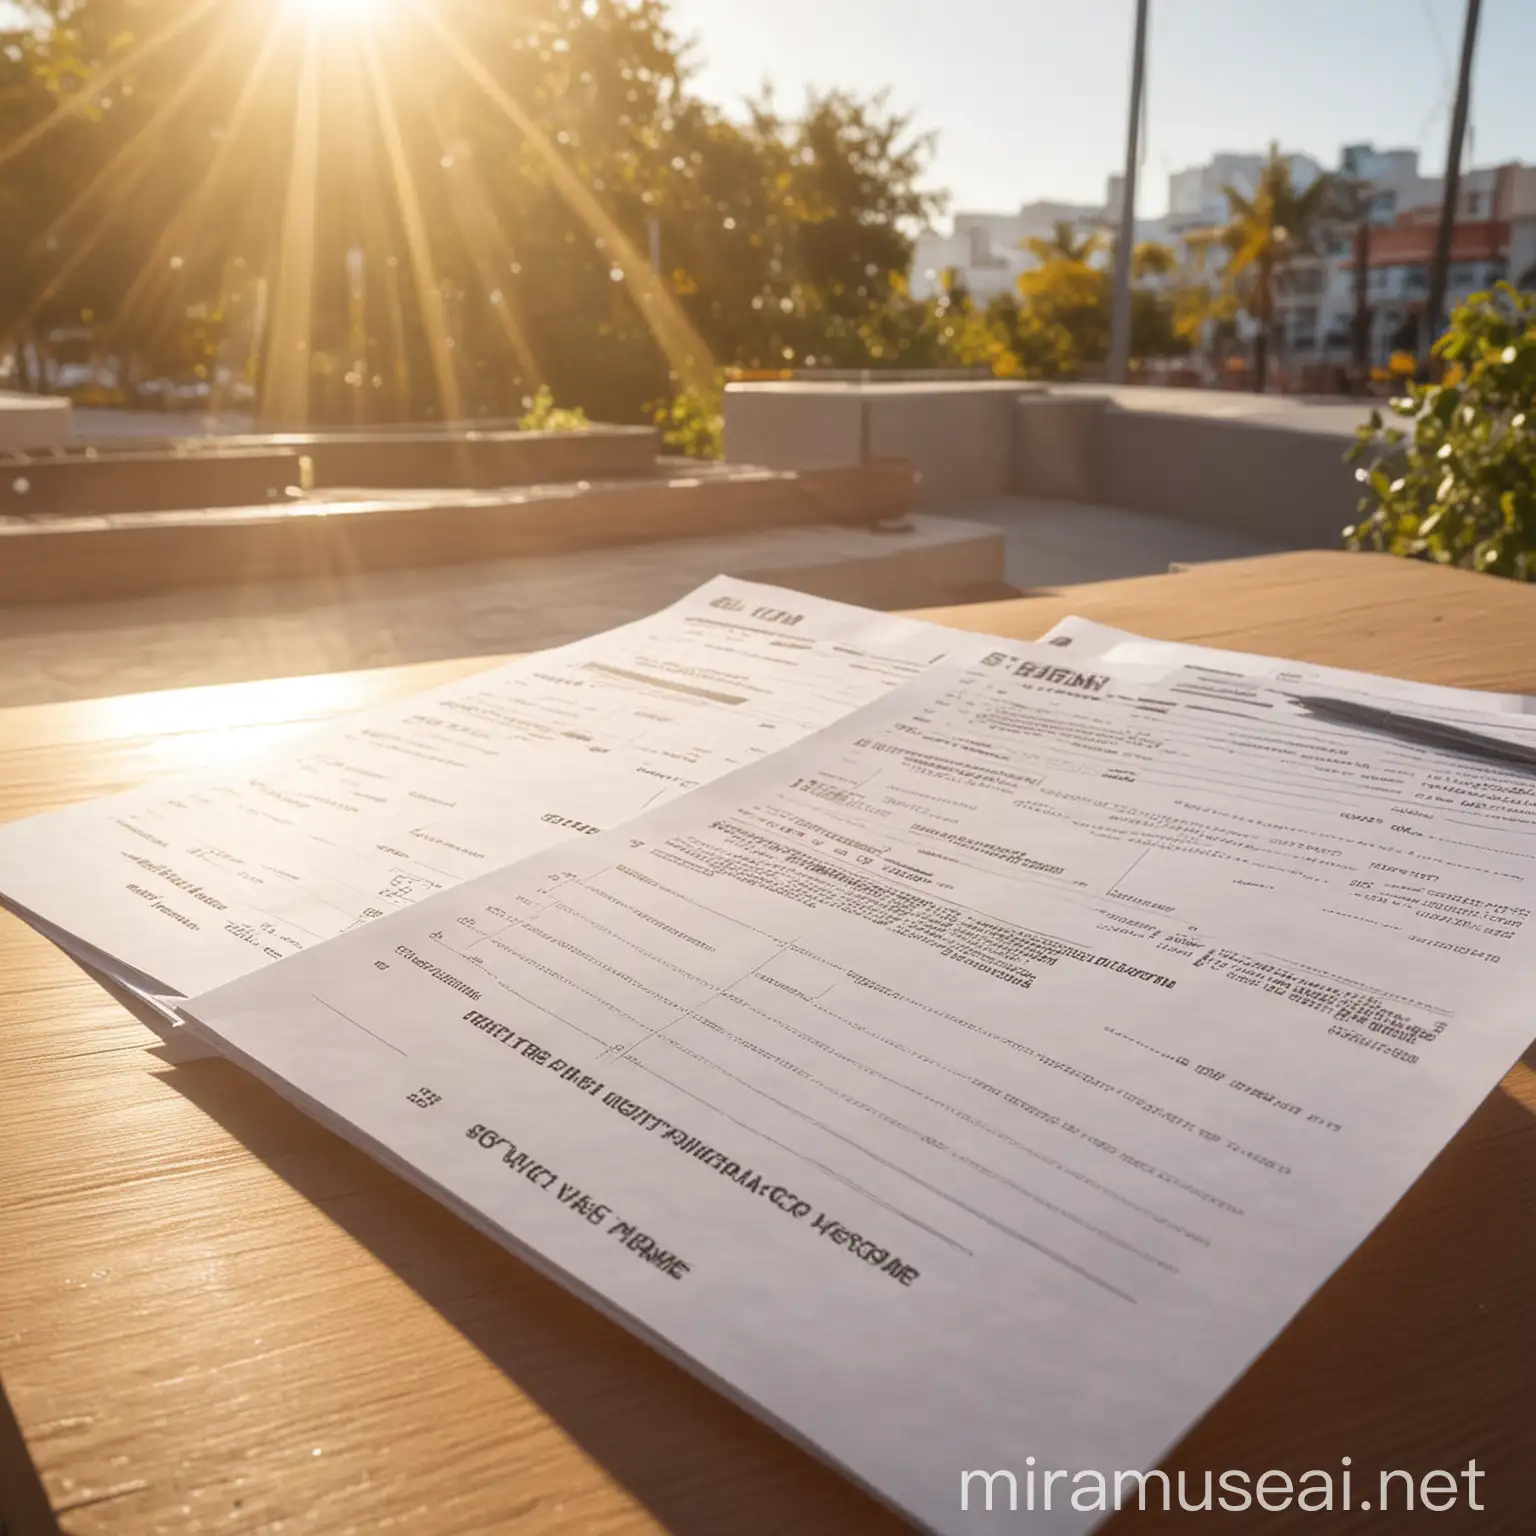 Sunlit Table with Scattered Registration Forms